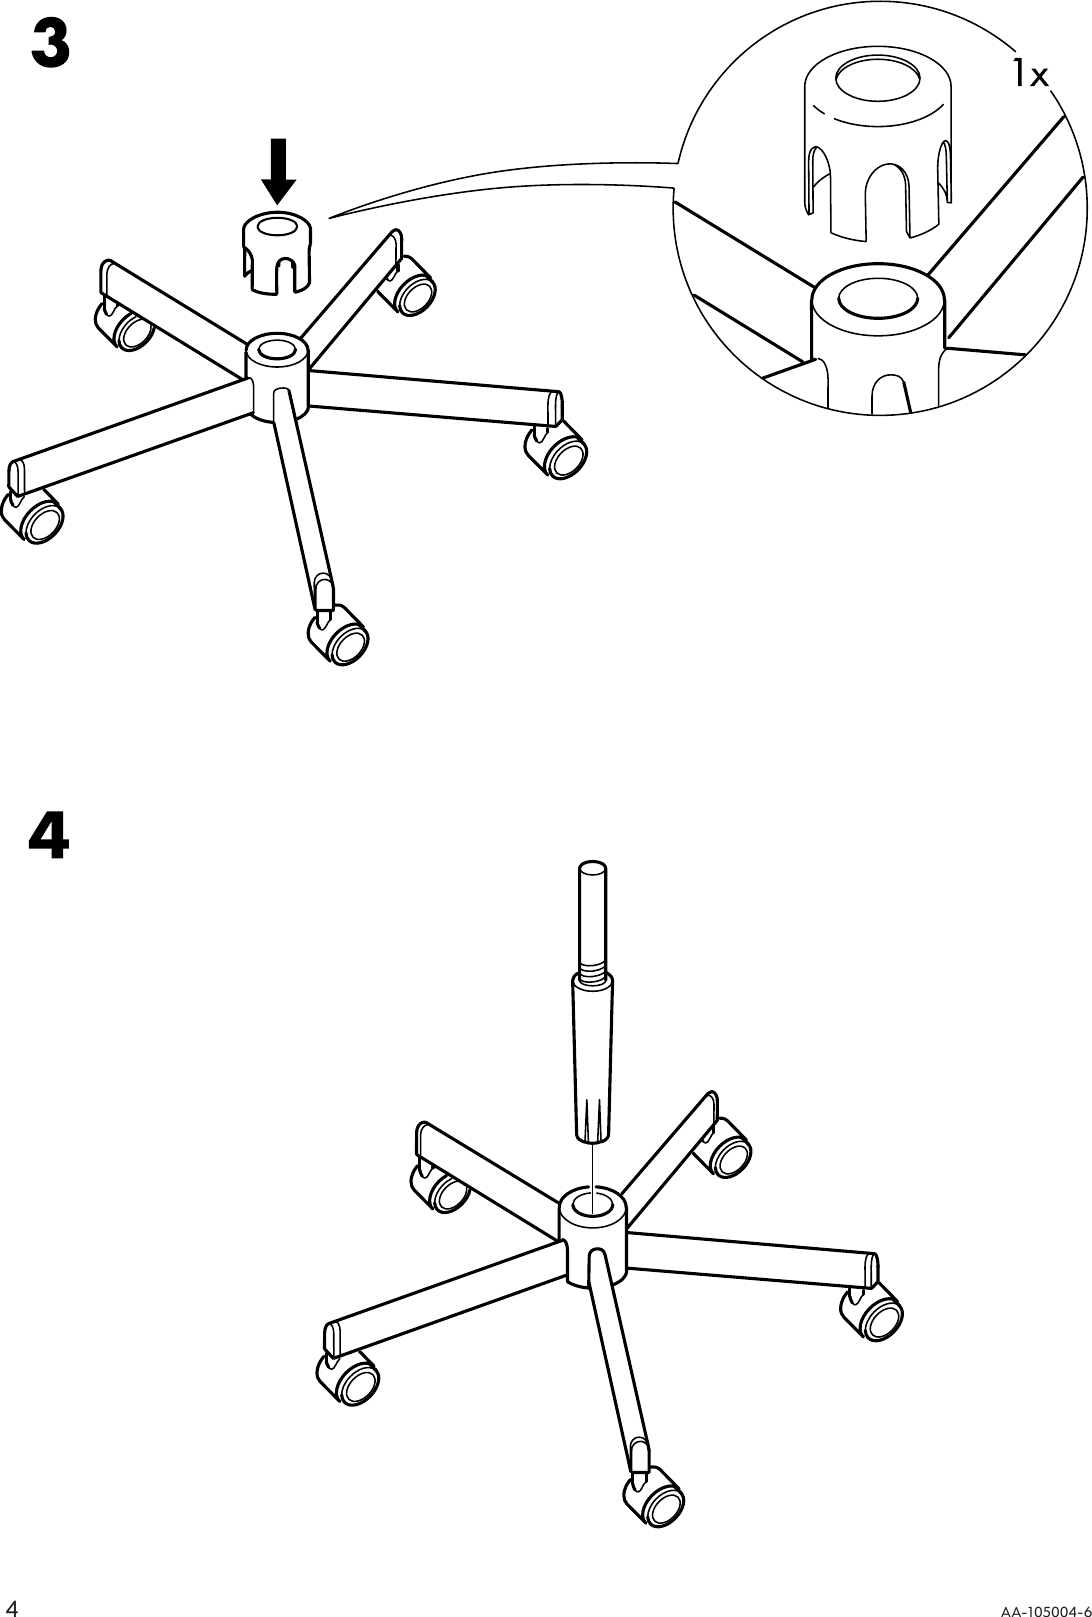 Page 4 of 8 - Ikea Ikea-Snille-Swivel-Chair-Frame-Assembly-Instruction